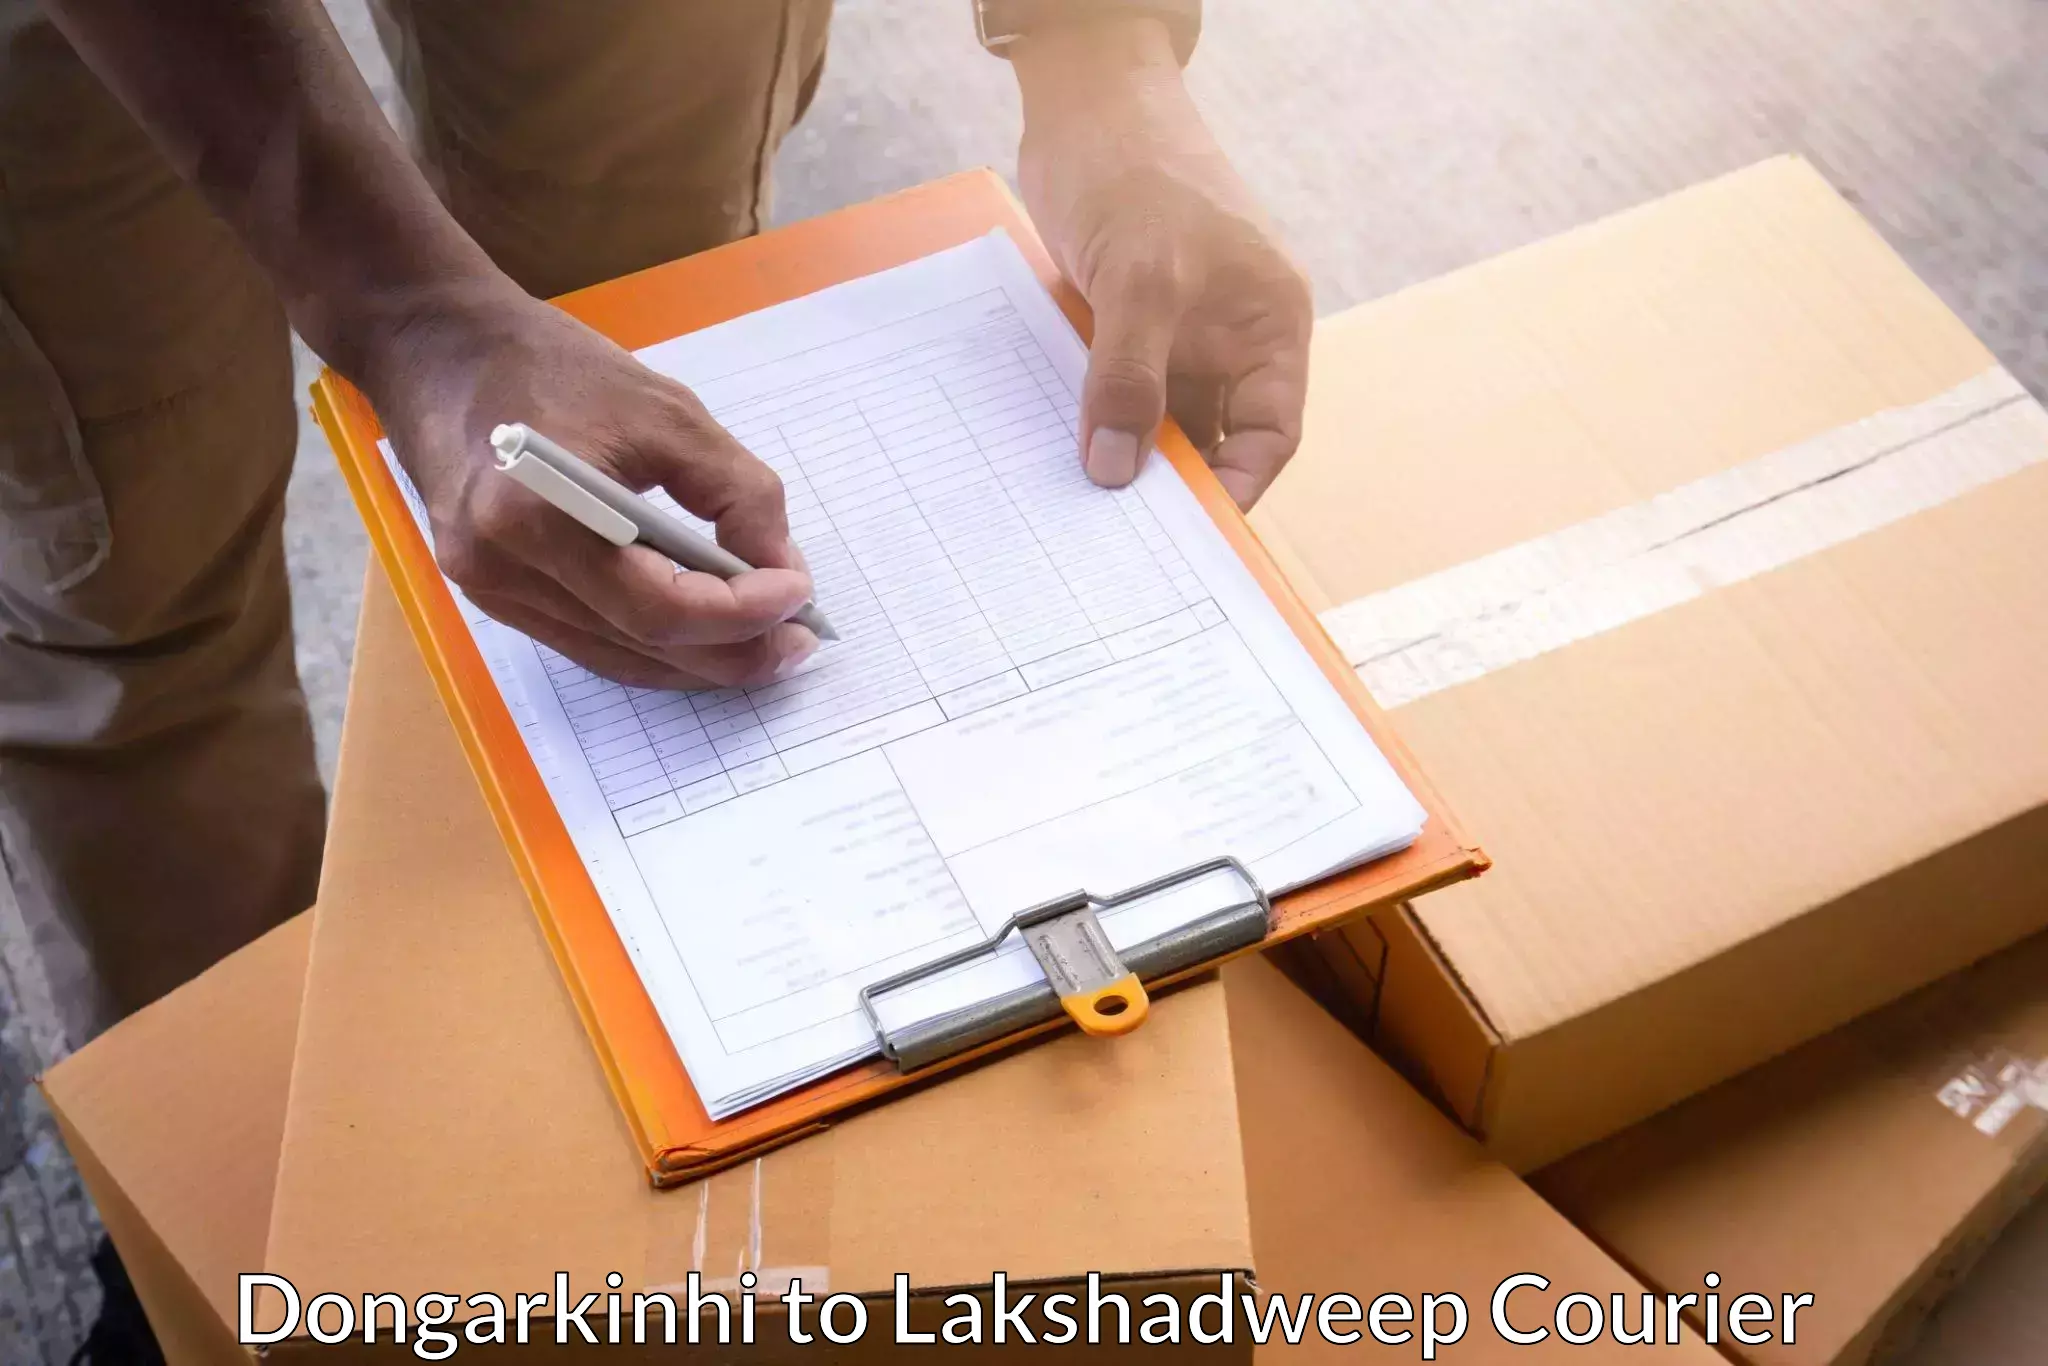 Efficient package consolidation Dongarkinhi to Lakshadweep